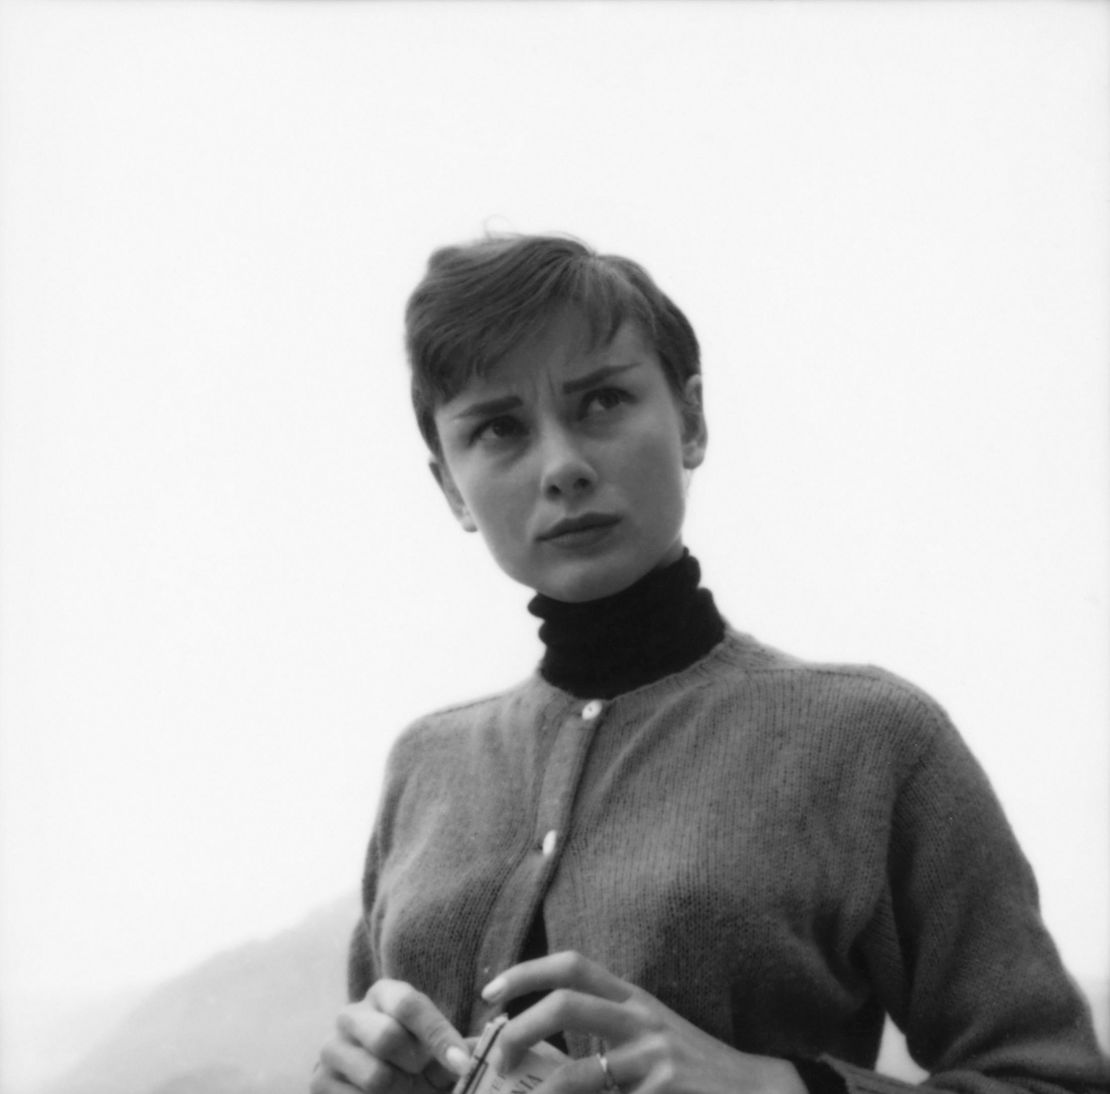 Audrey Hepburn pictured on the terrace of the Restaurant Hammetschwand at the summit of the Bürgenstock, Switzerland.